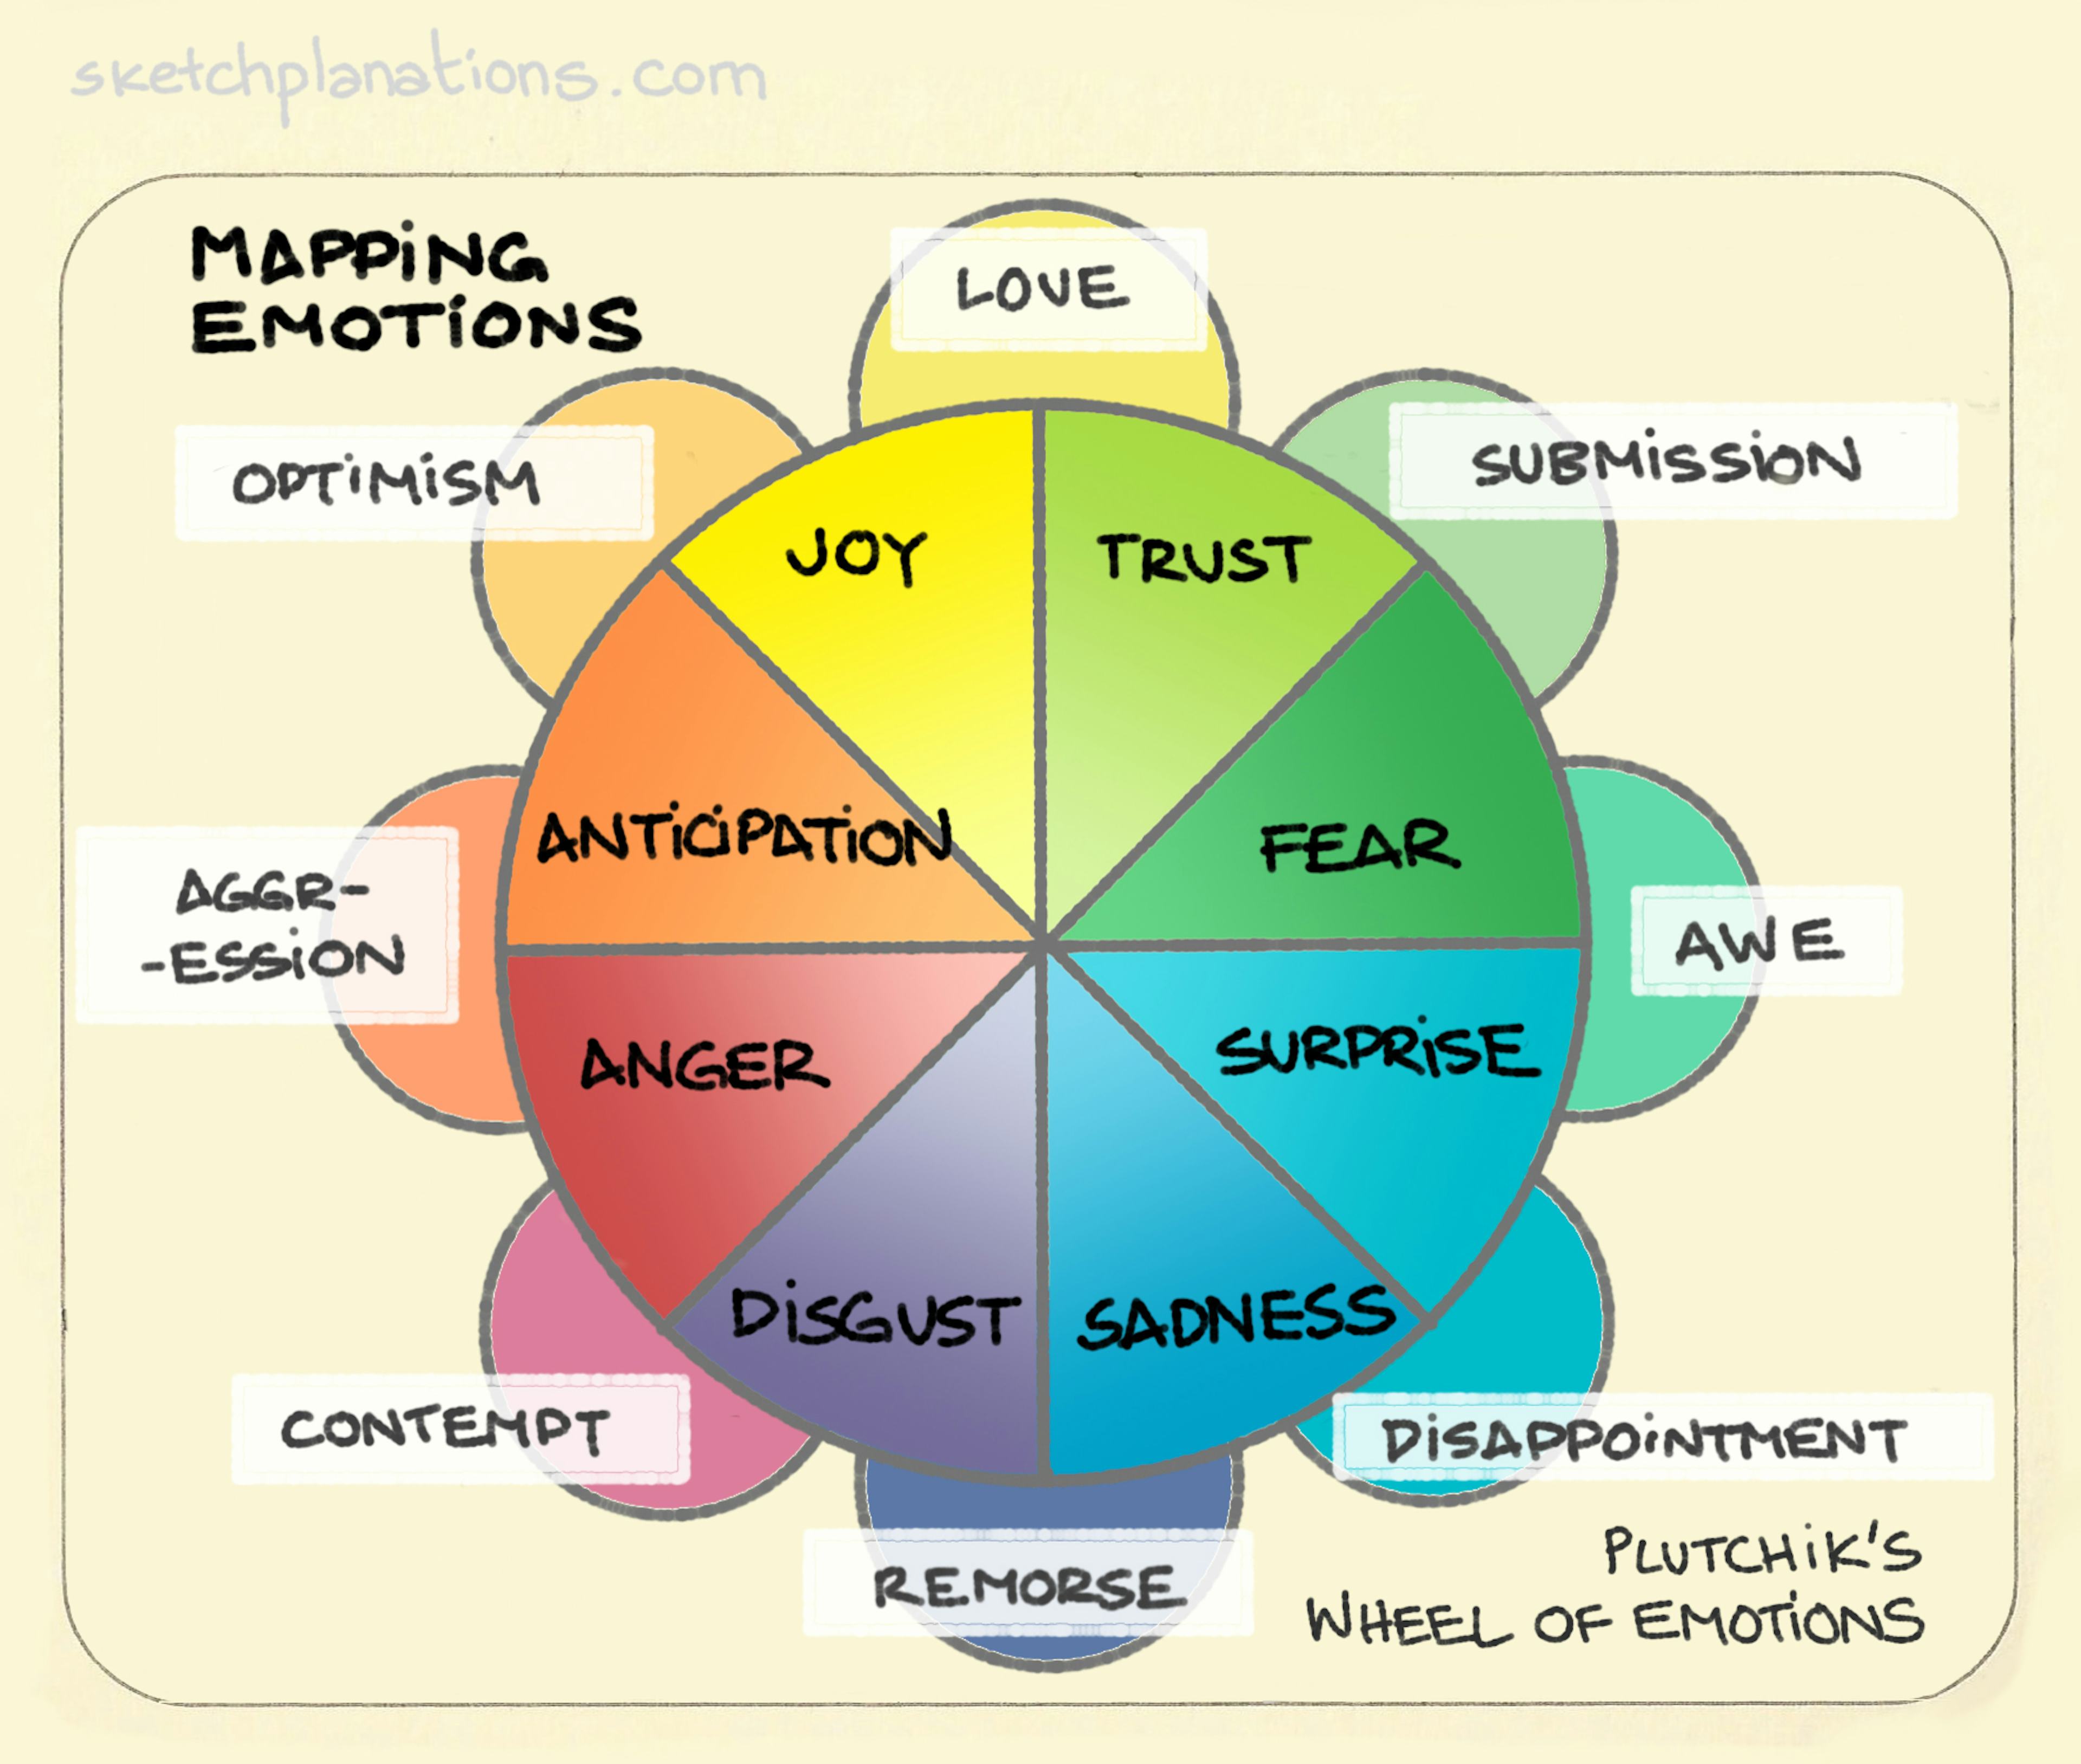 Mapping emotions - Sketchplanations